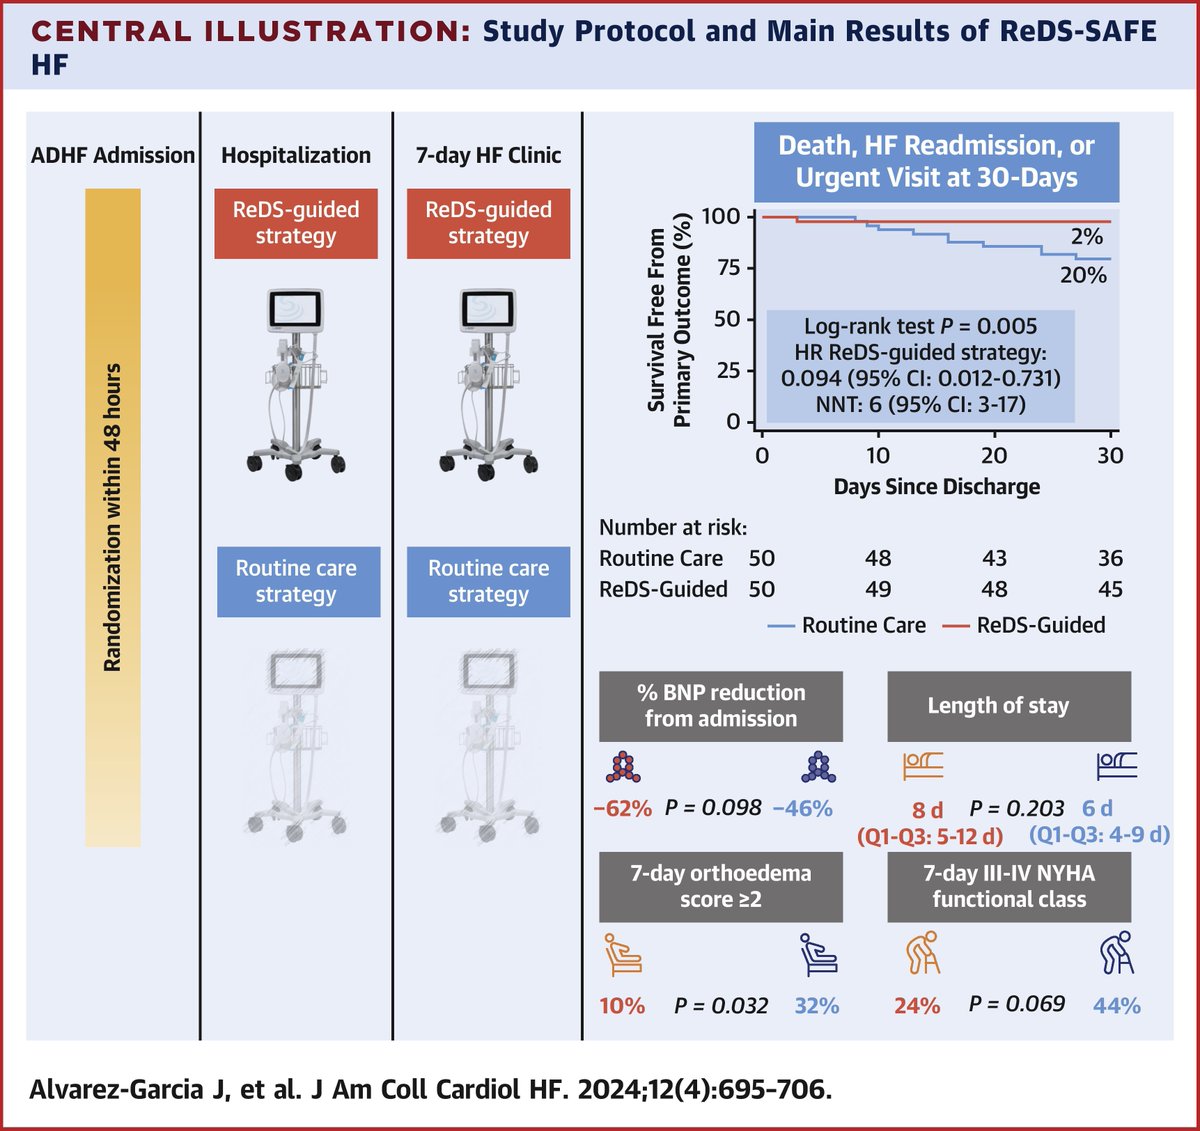 A ReDS-guided strategy to treat congestion improved 1-month prognosis postdischarge in this proof-of-concept study, mainly because of a decrease in the number of HF readmissions. bit.ly/4dirF9b #JACCHF #HeartFailure @j_alvarezgarcia @spinneymd